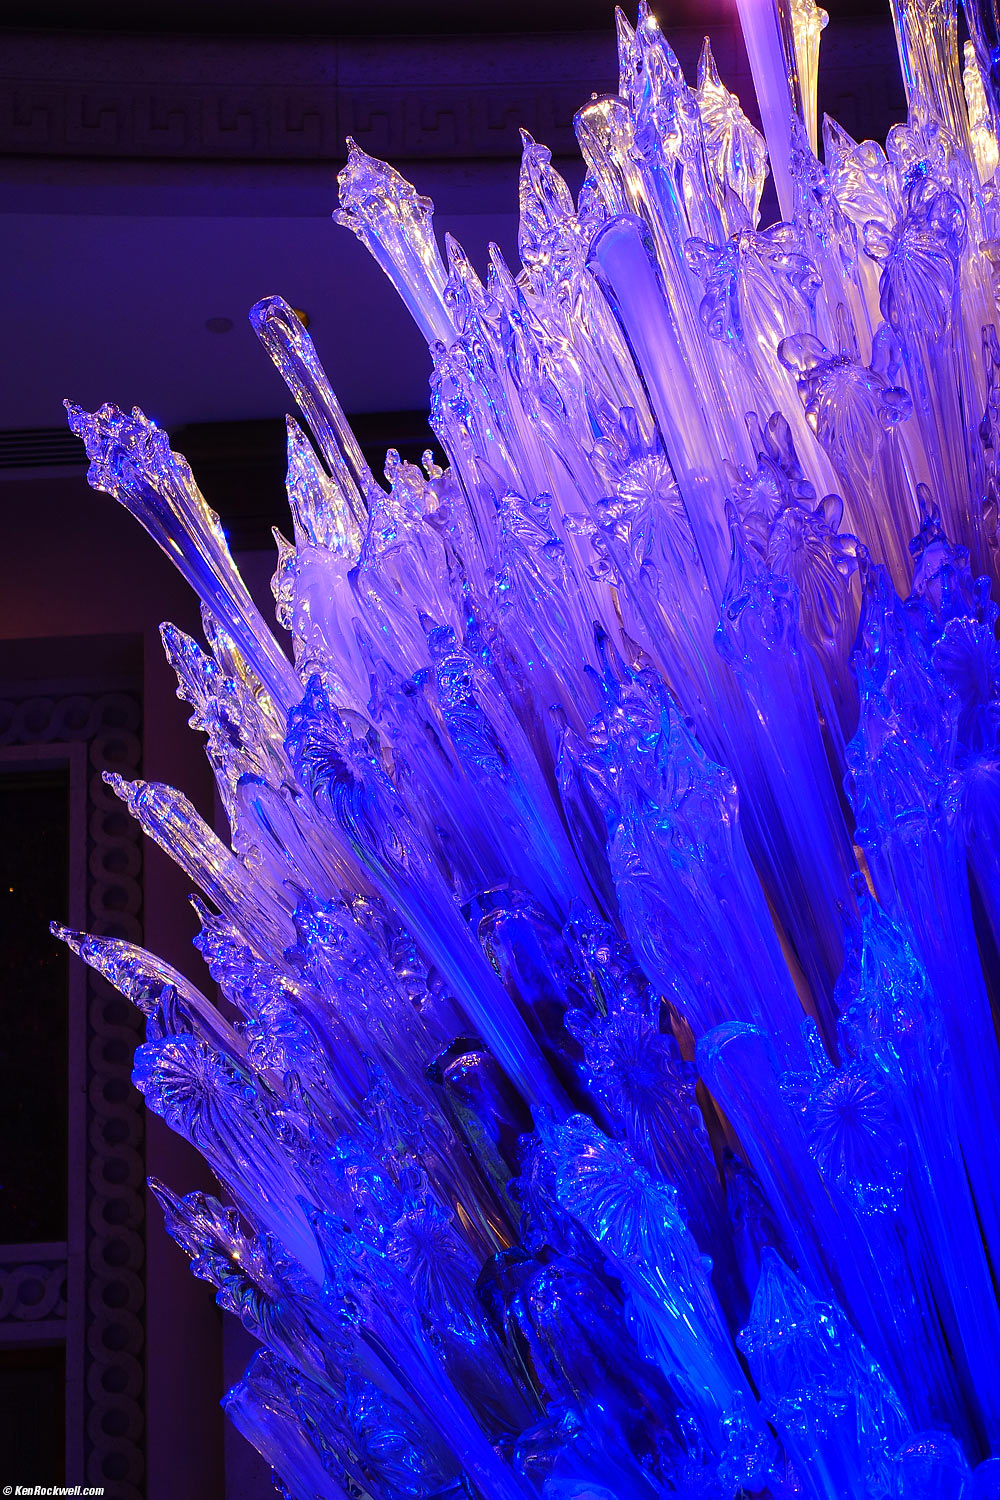 Dale Chihuly glass sculpture in blue, Atlantis, Bahamas